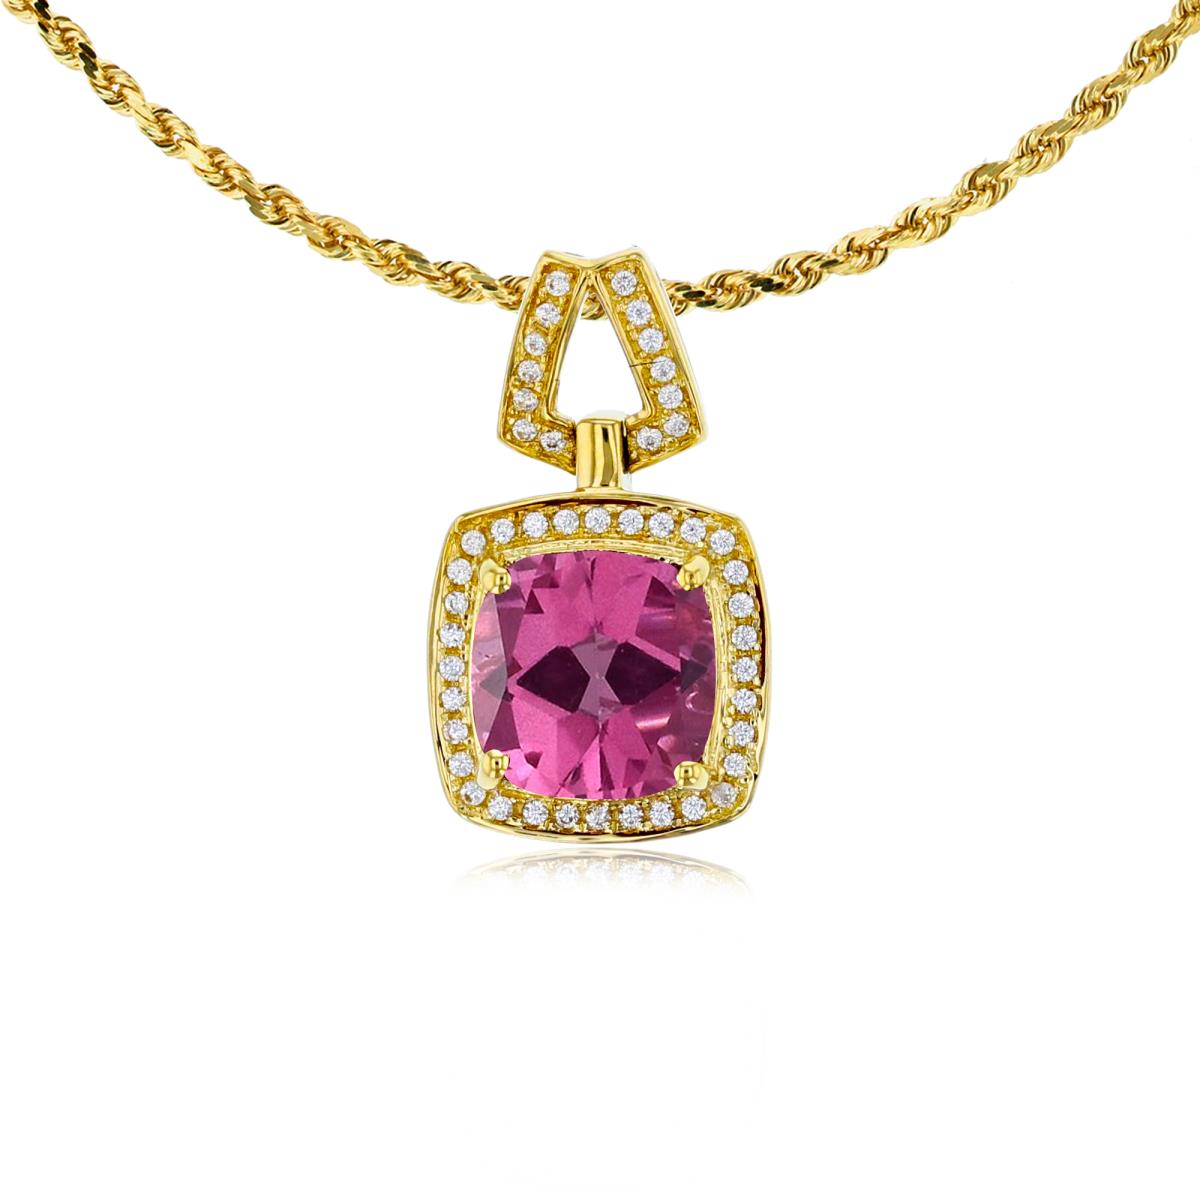 10K Yellow Gold 7mm Cushion Pure Pink & 0.10 CTTW Diamond Halo 18" Rope Chain Necklace